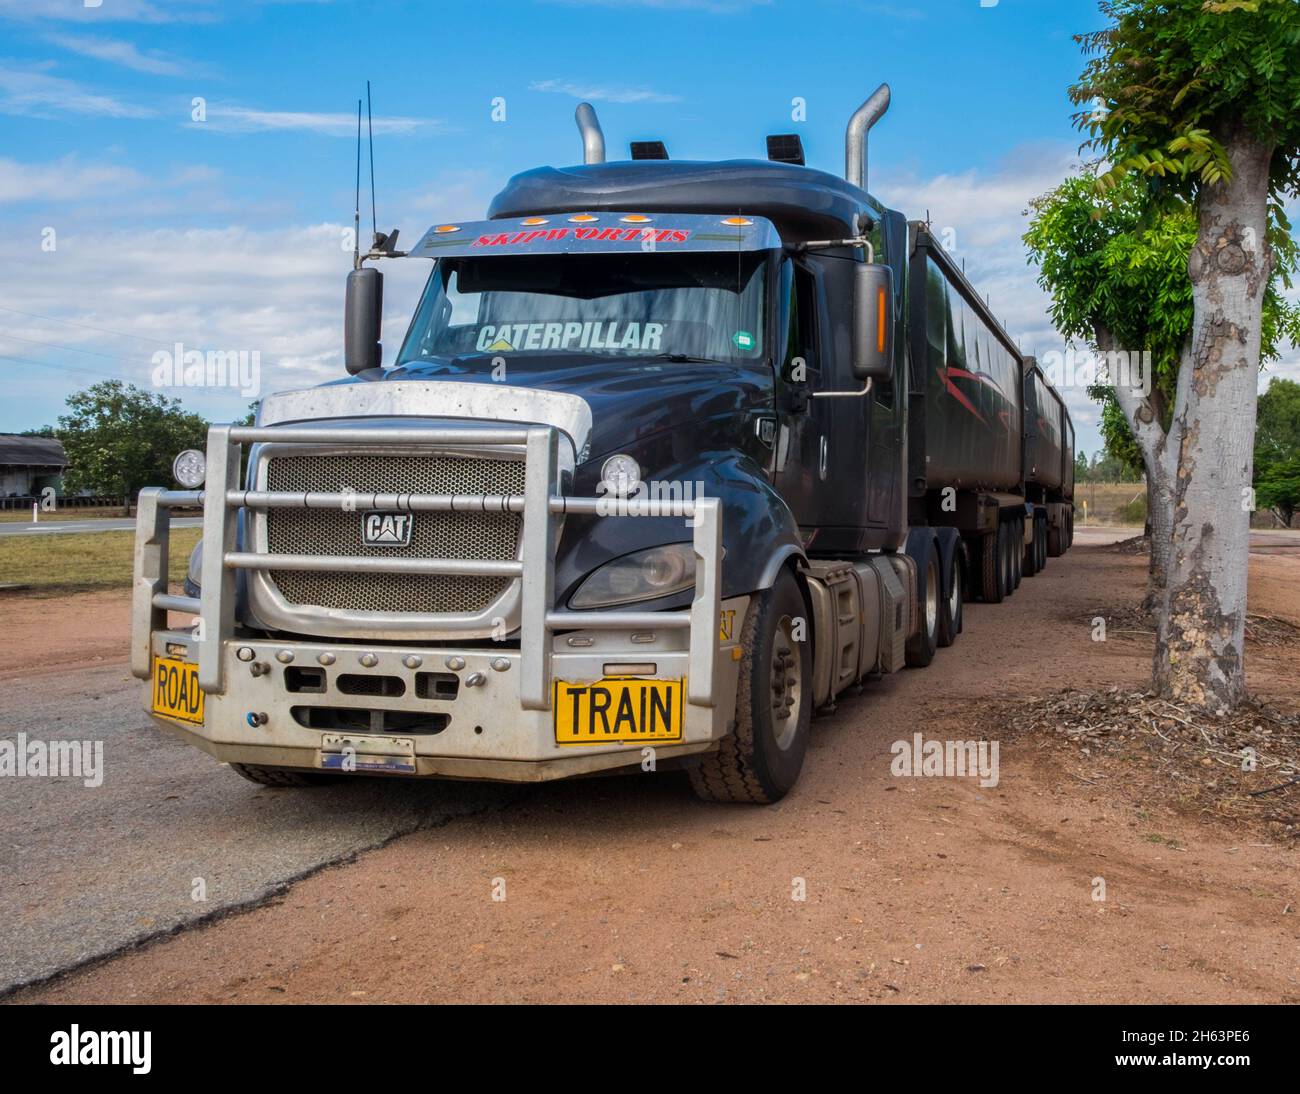 A typical example of the road trains in Australia, Carrying livestock, mining equipment, ore and who knows what else. Stock Photo